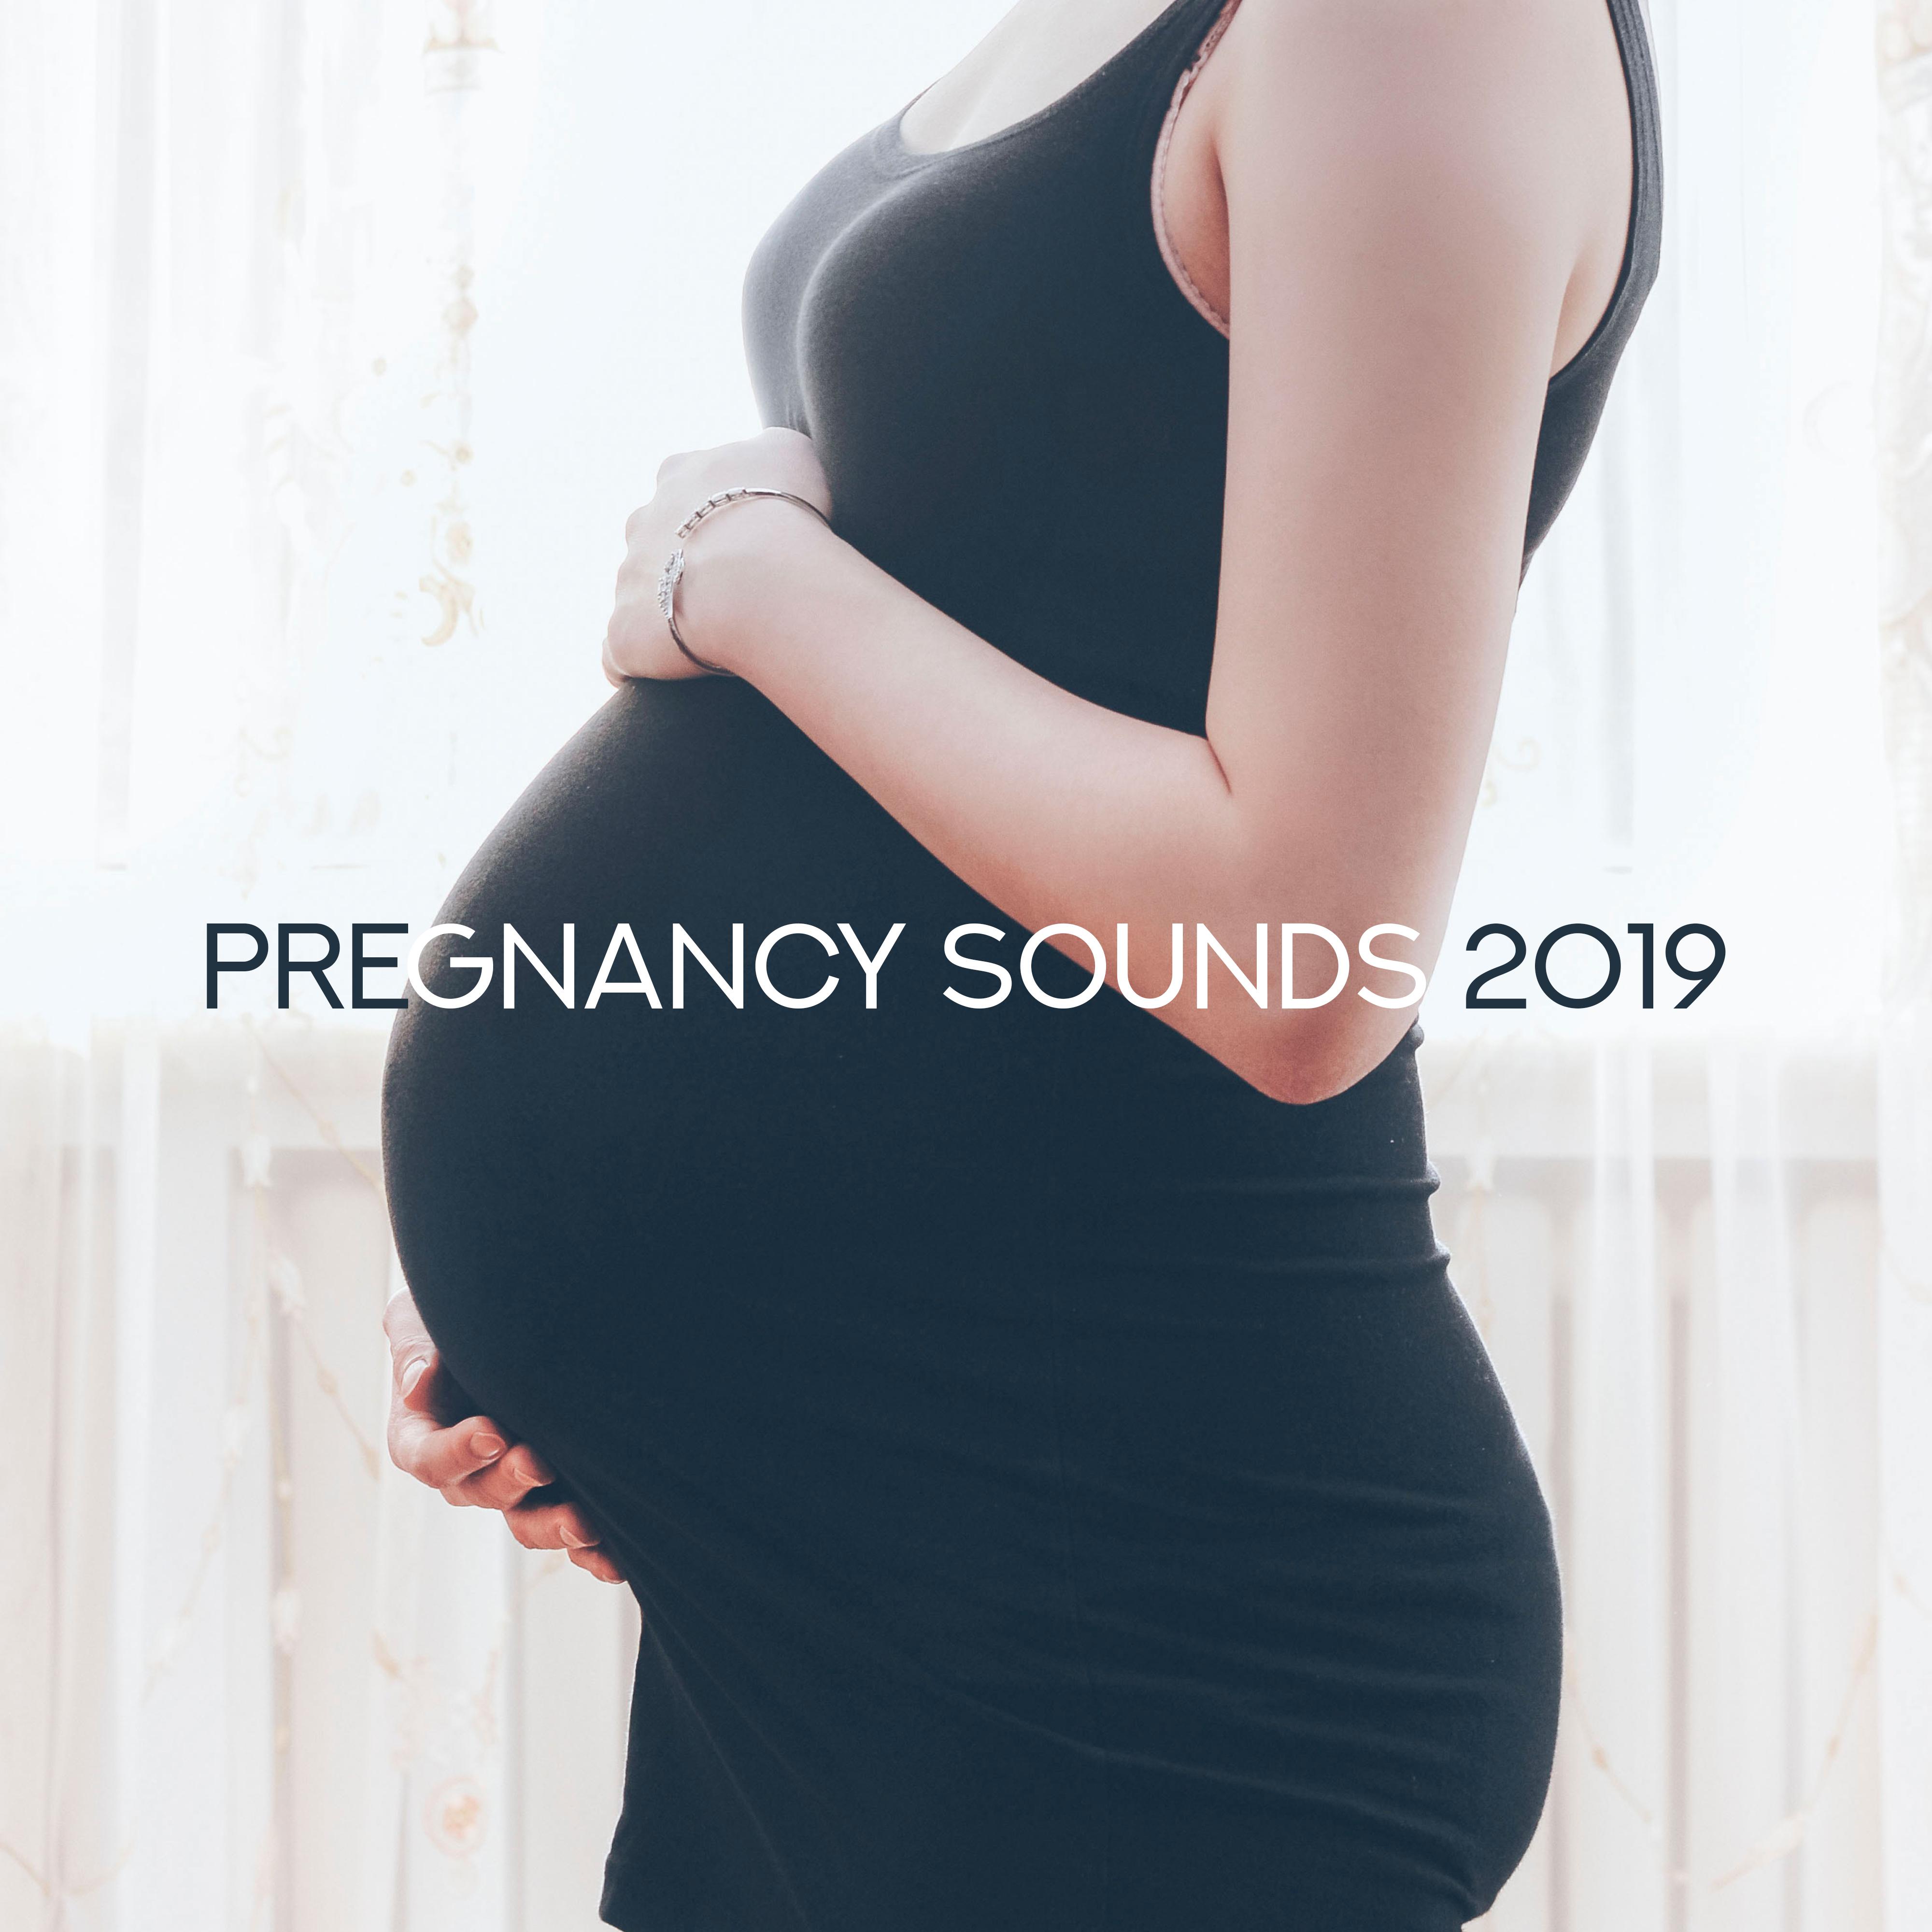 Pregnancy Sounds 2019  Healing Therapy, Calming Zen, Soothing Pregnancy Music, Deep Harmony, Relaxing Sounds to Calm Down, Stress Relief